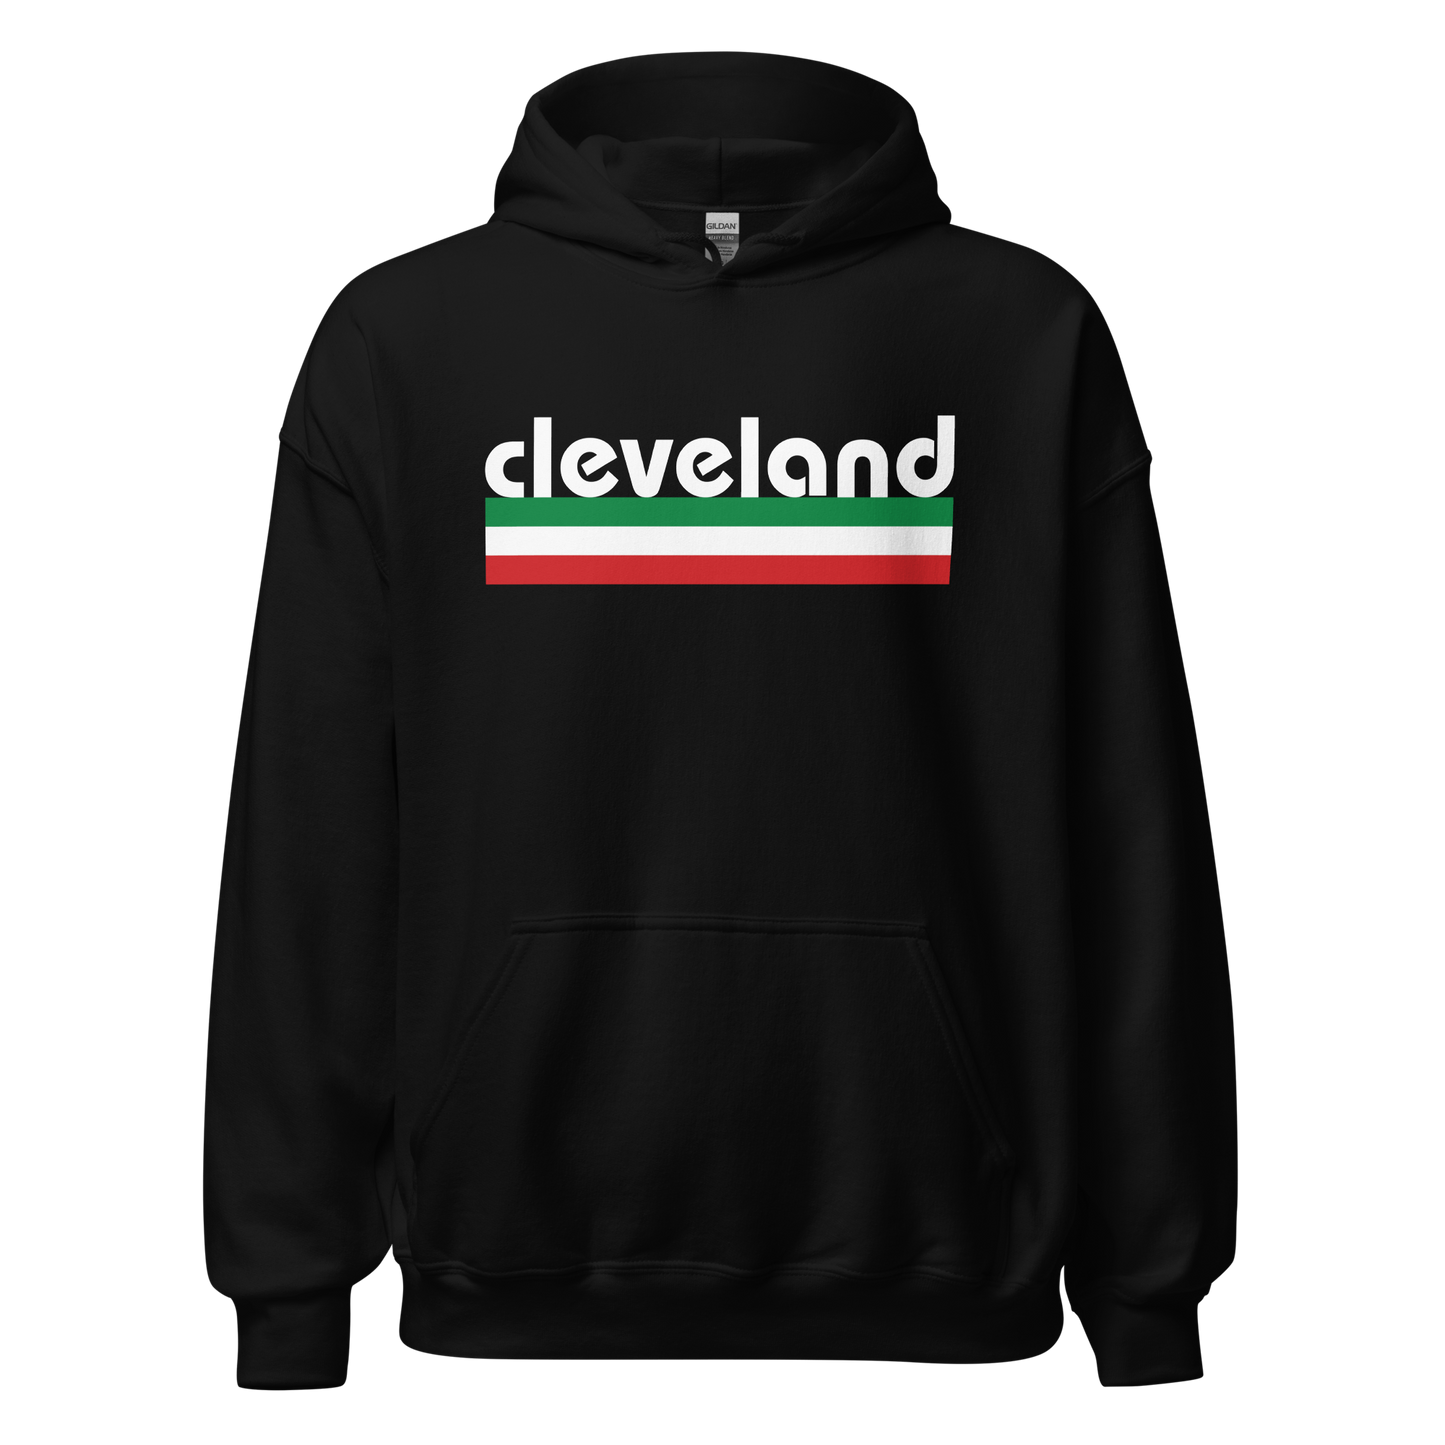 Cleveland Italian Pride Hoodie- Vintage Flag Pullover for Cleveland Italians